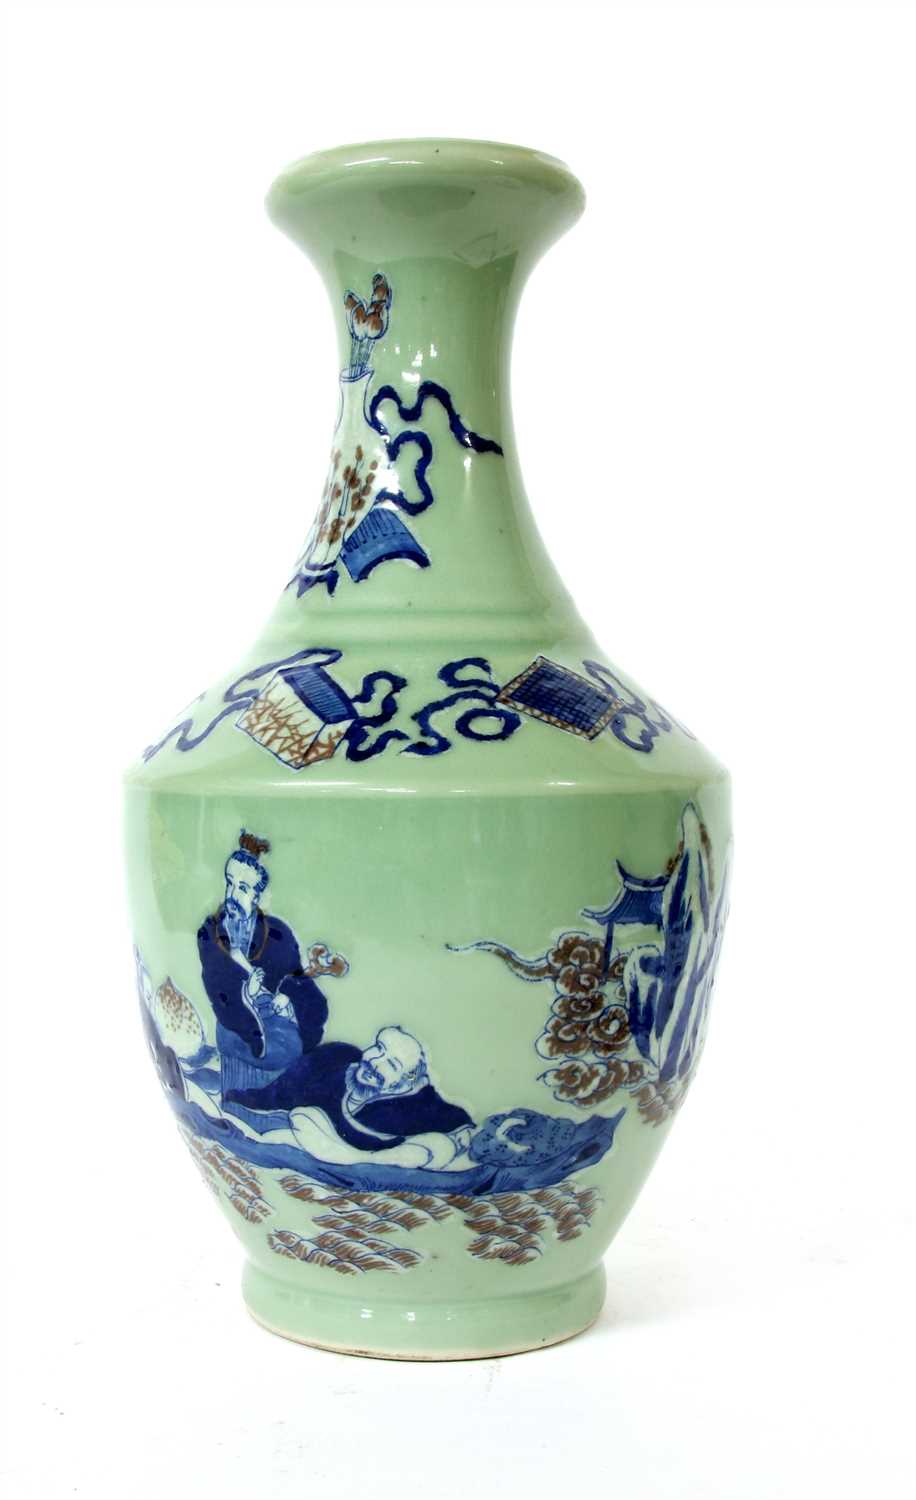 Lot 194 - A Chinese celadon vase with figures